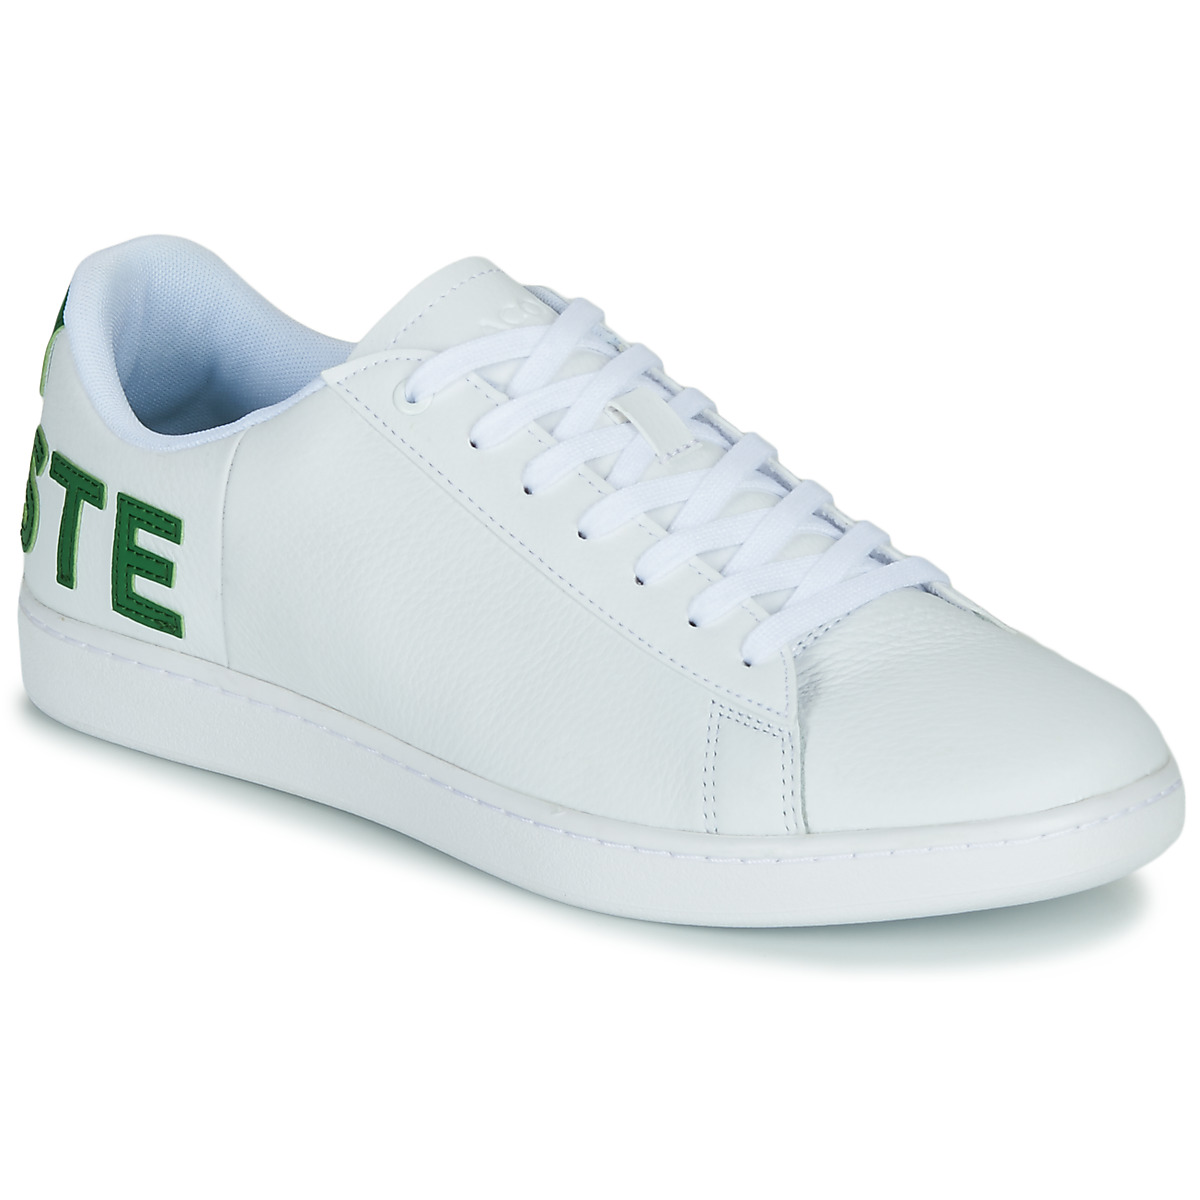 Lacoste Carnaby EVO 119 9 Mens White Green Trainers Sport Casual Shoes